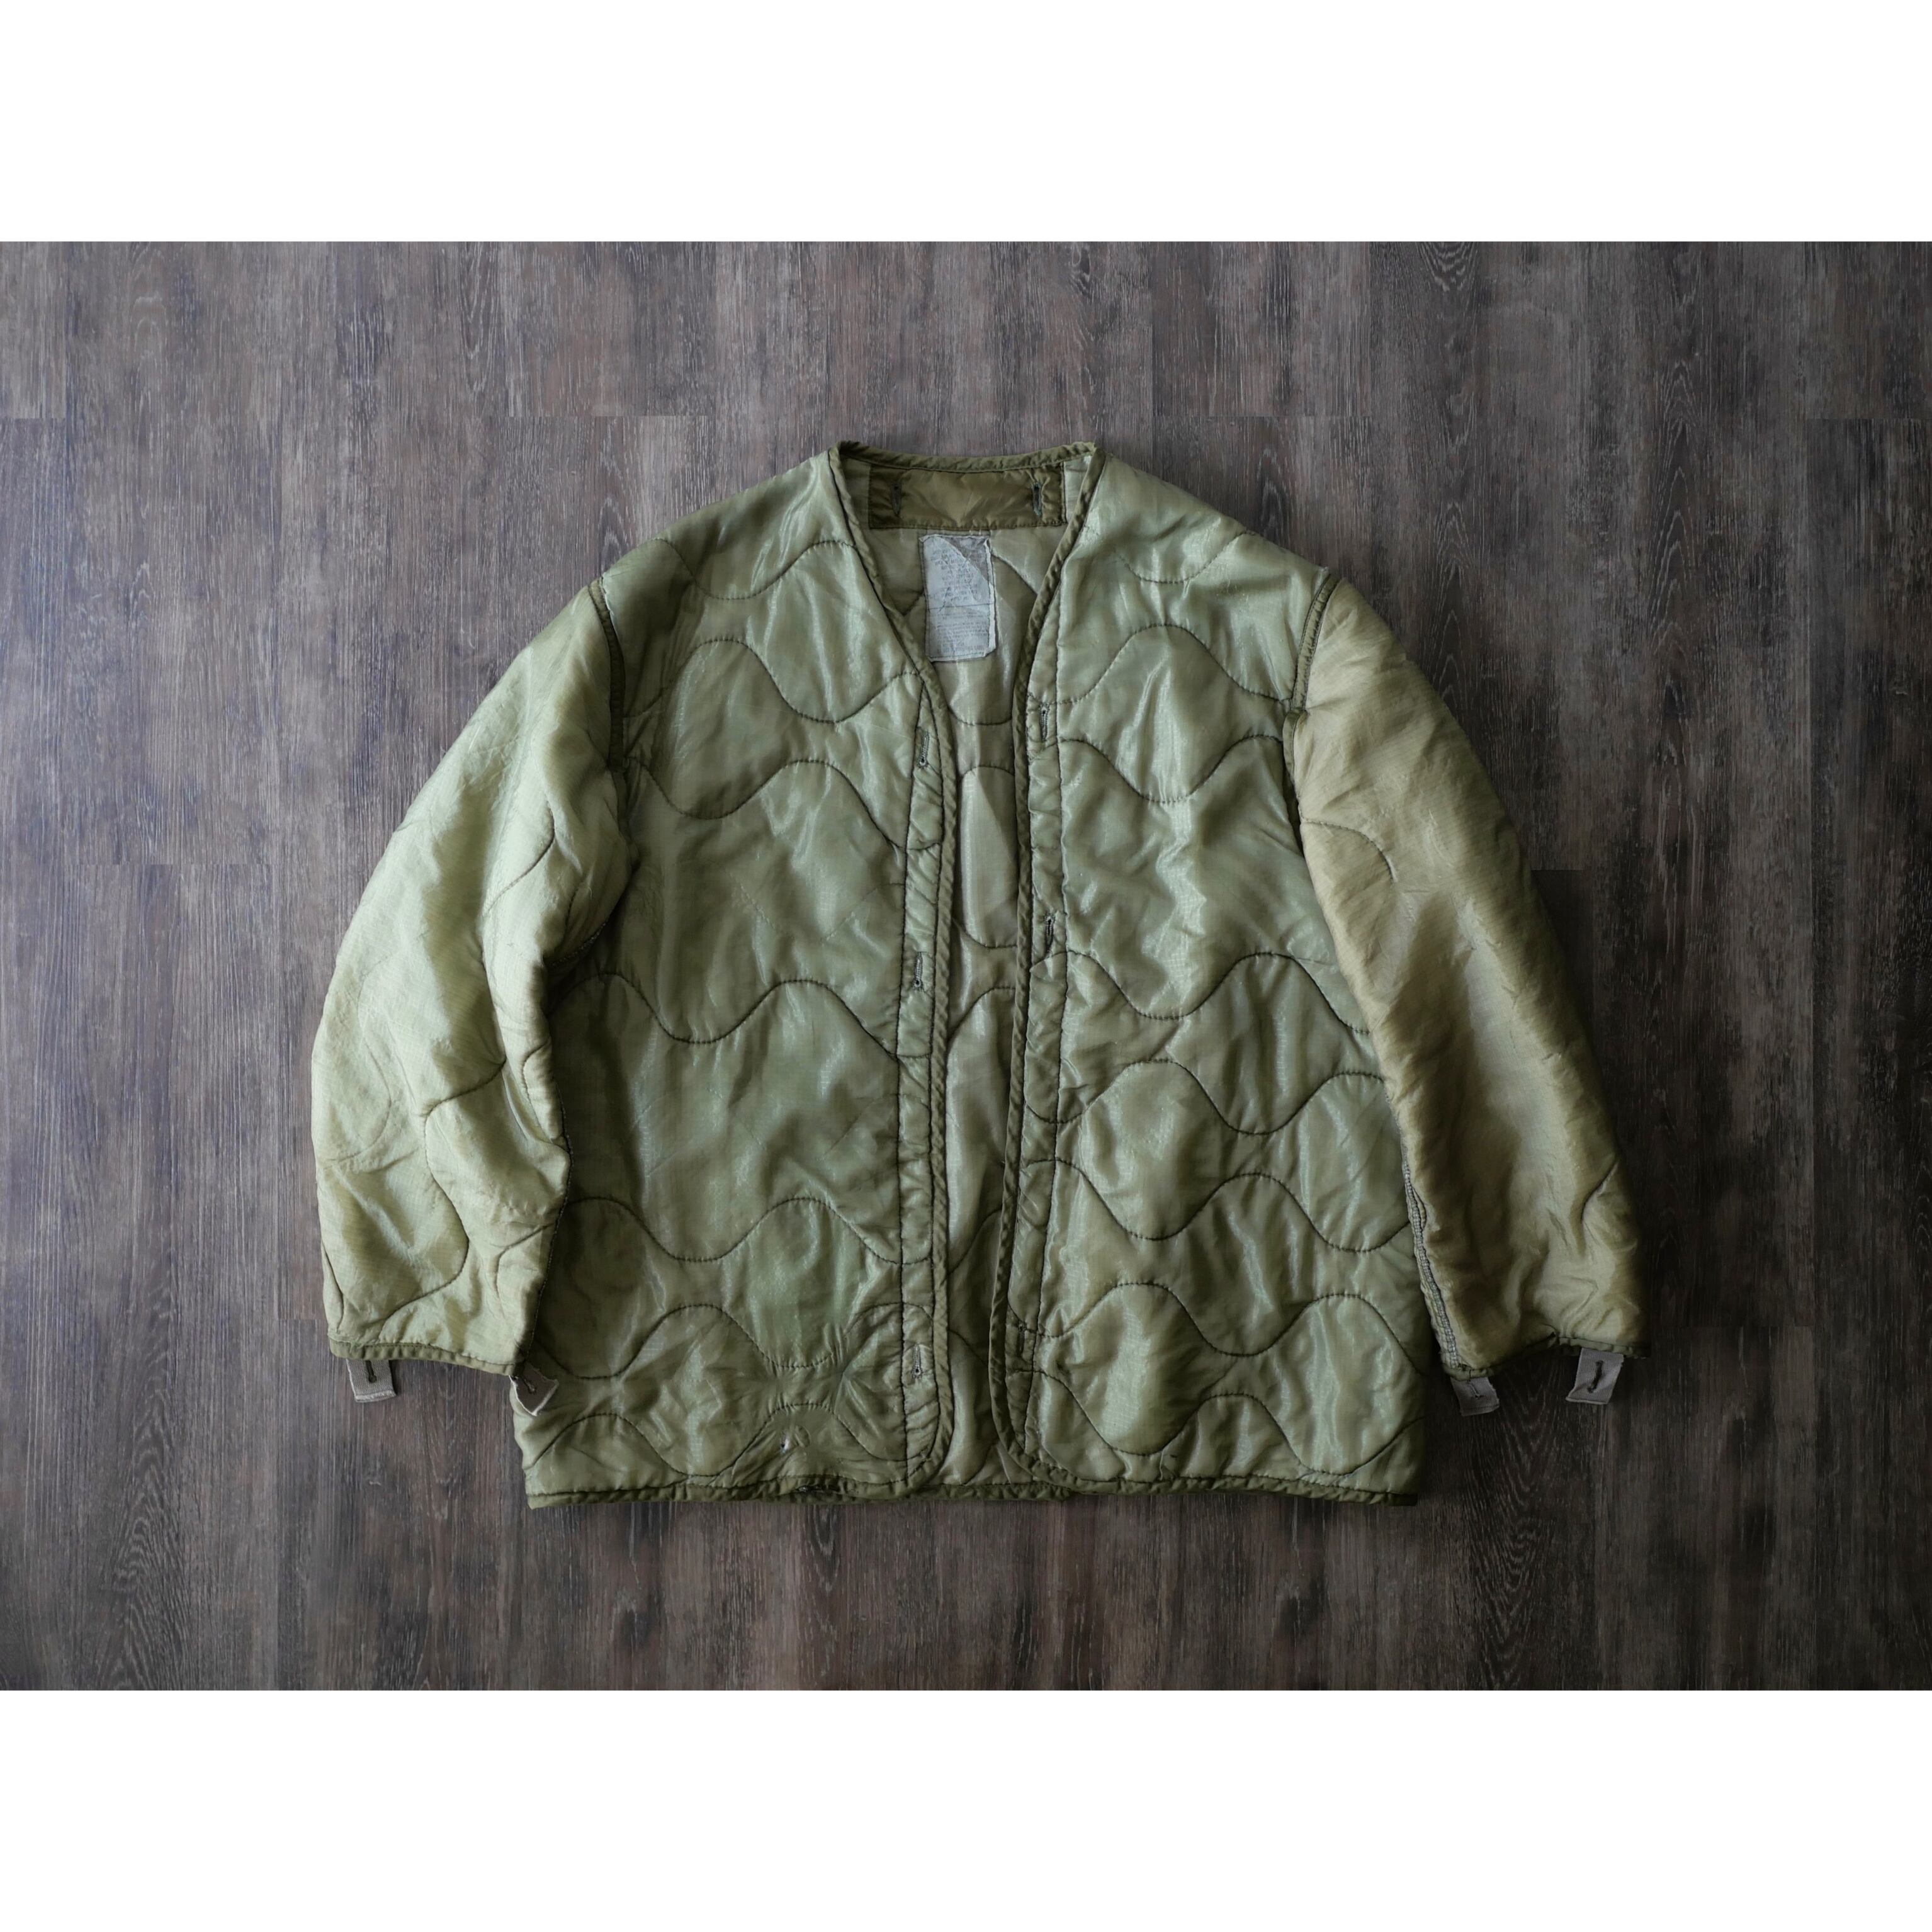 80s usarmy quilting liner jkt “M-65” 米軍 キルティングジャケット